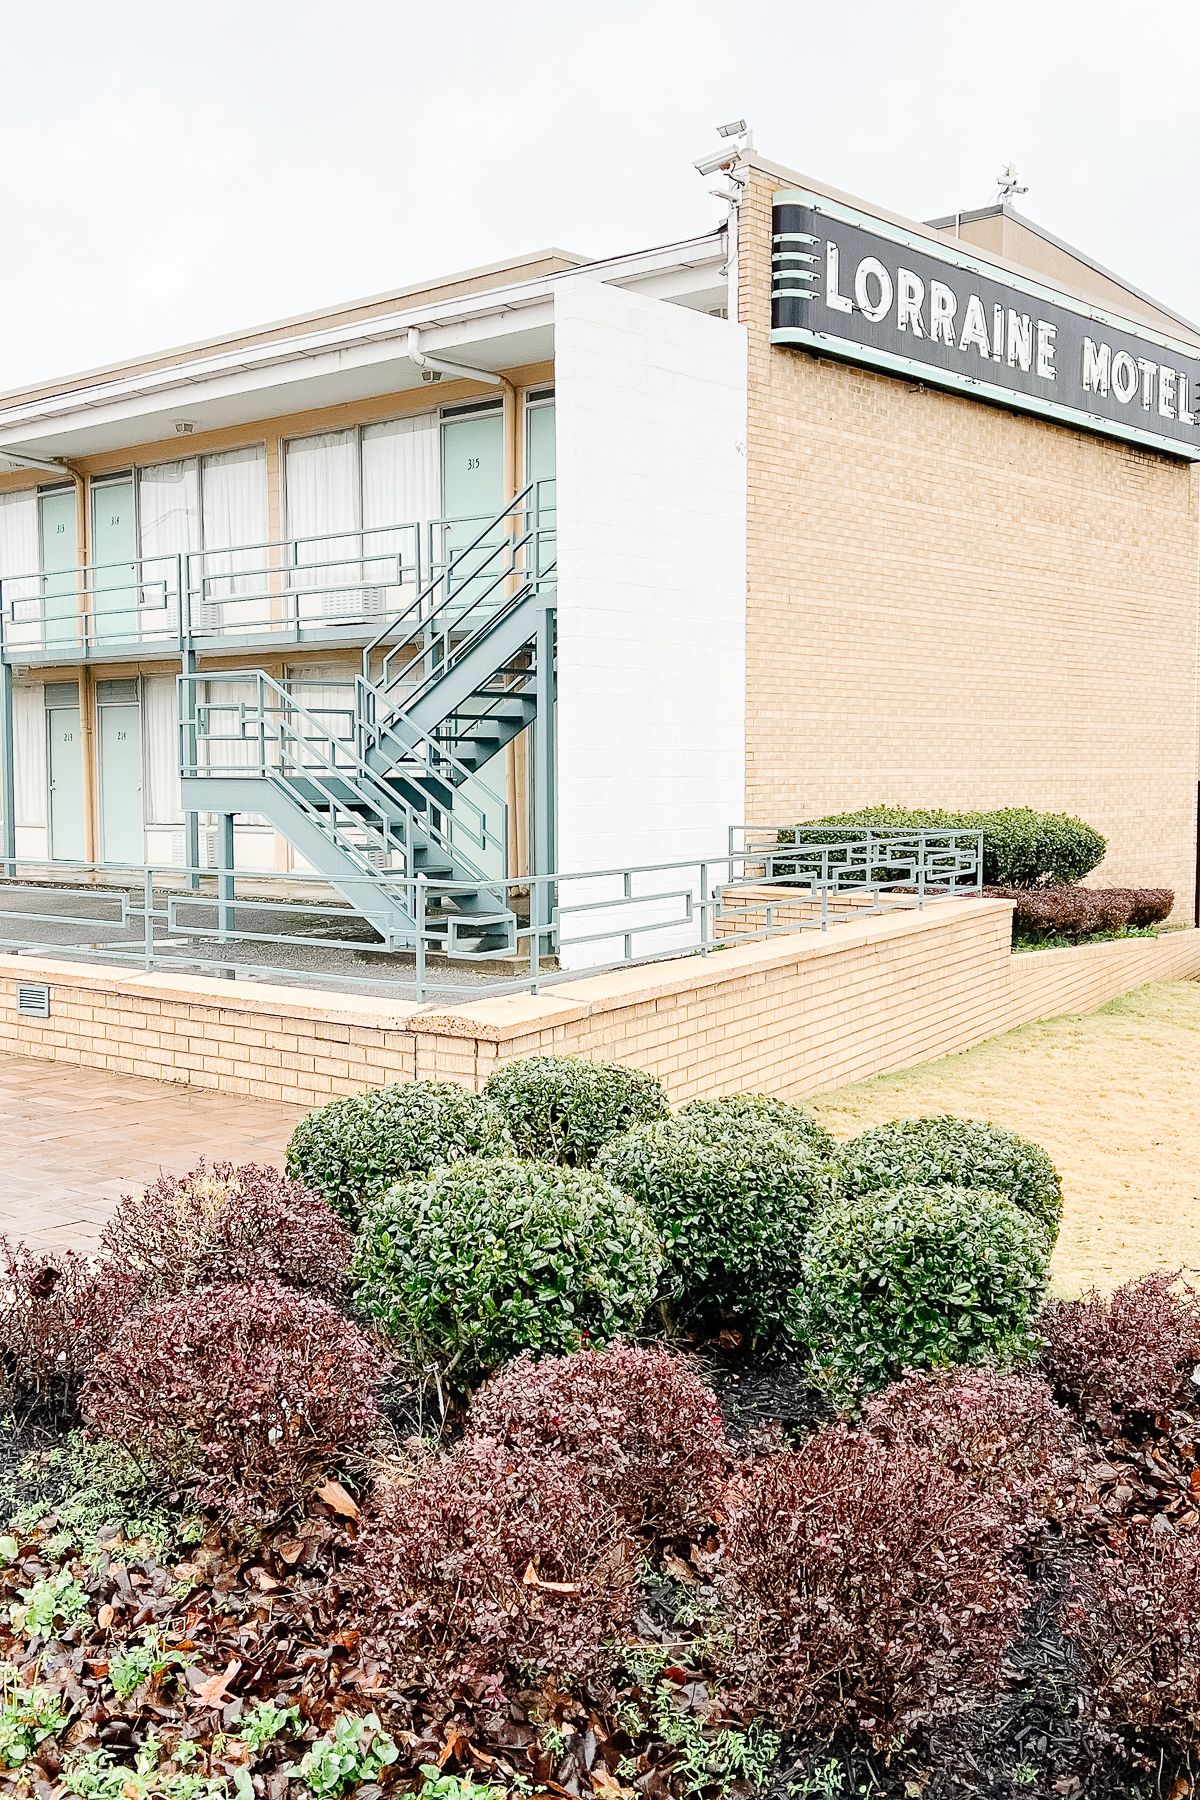 An image of the exterior of the Lorraine Motel in Memphis Tennessee